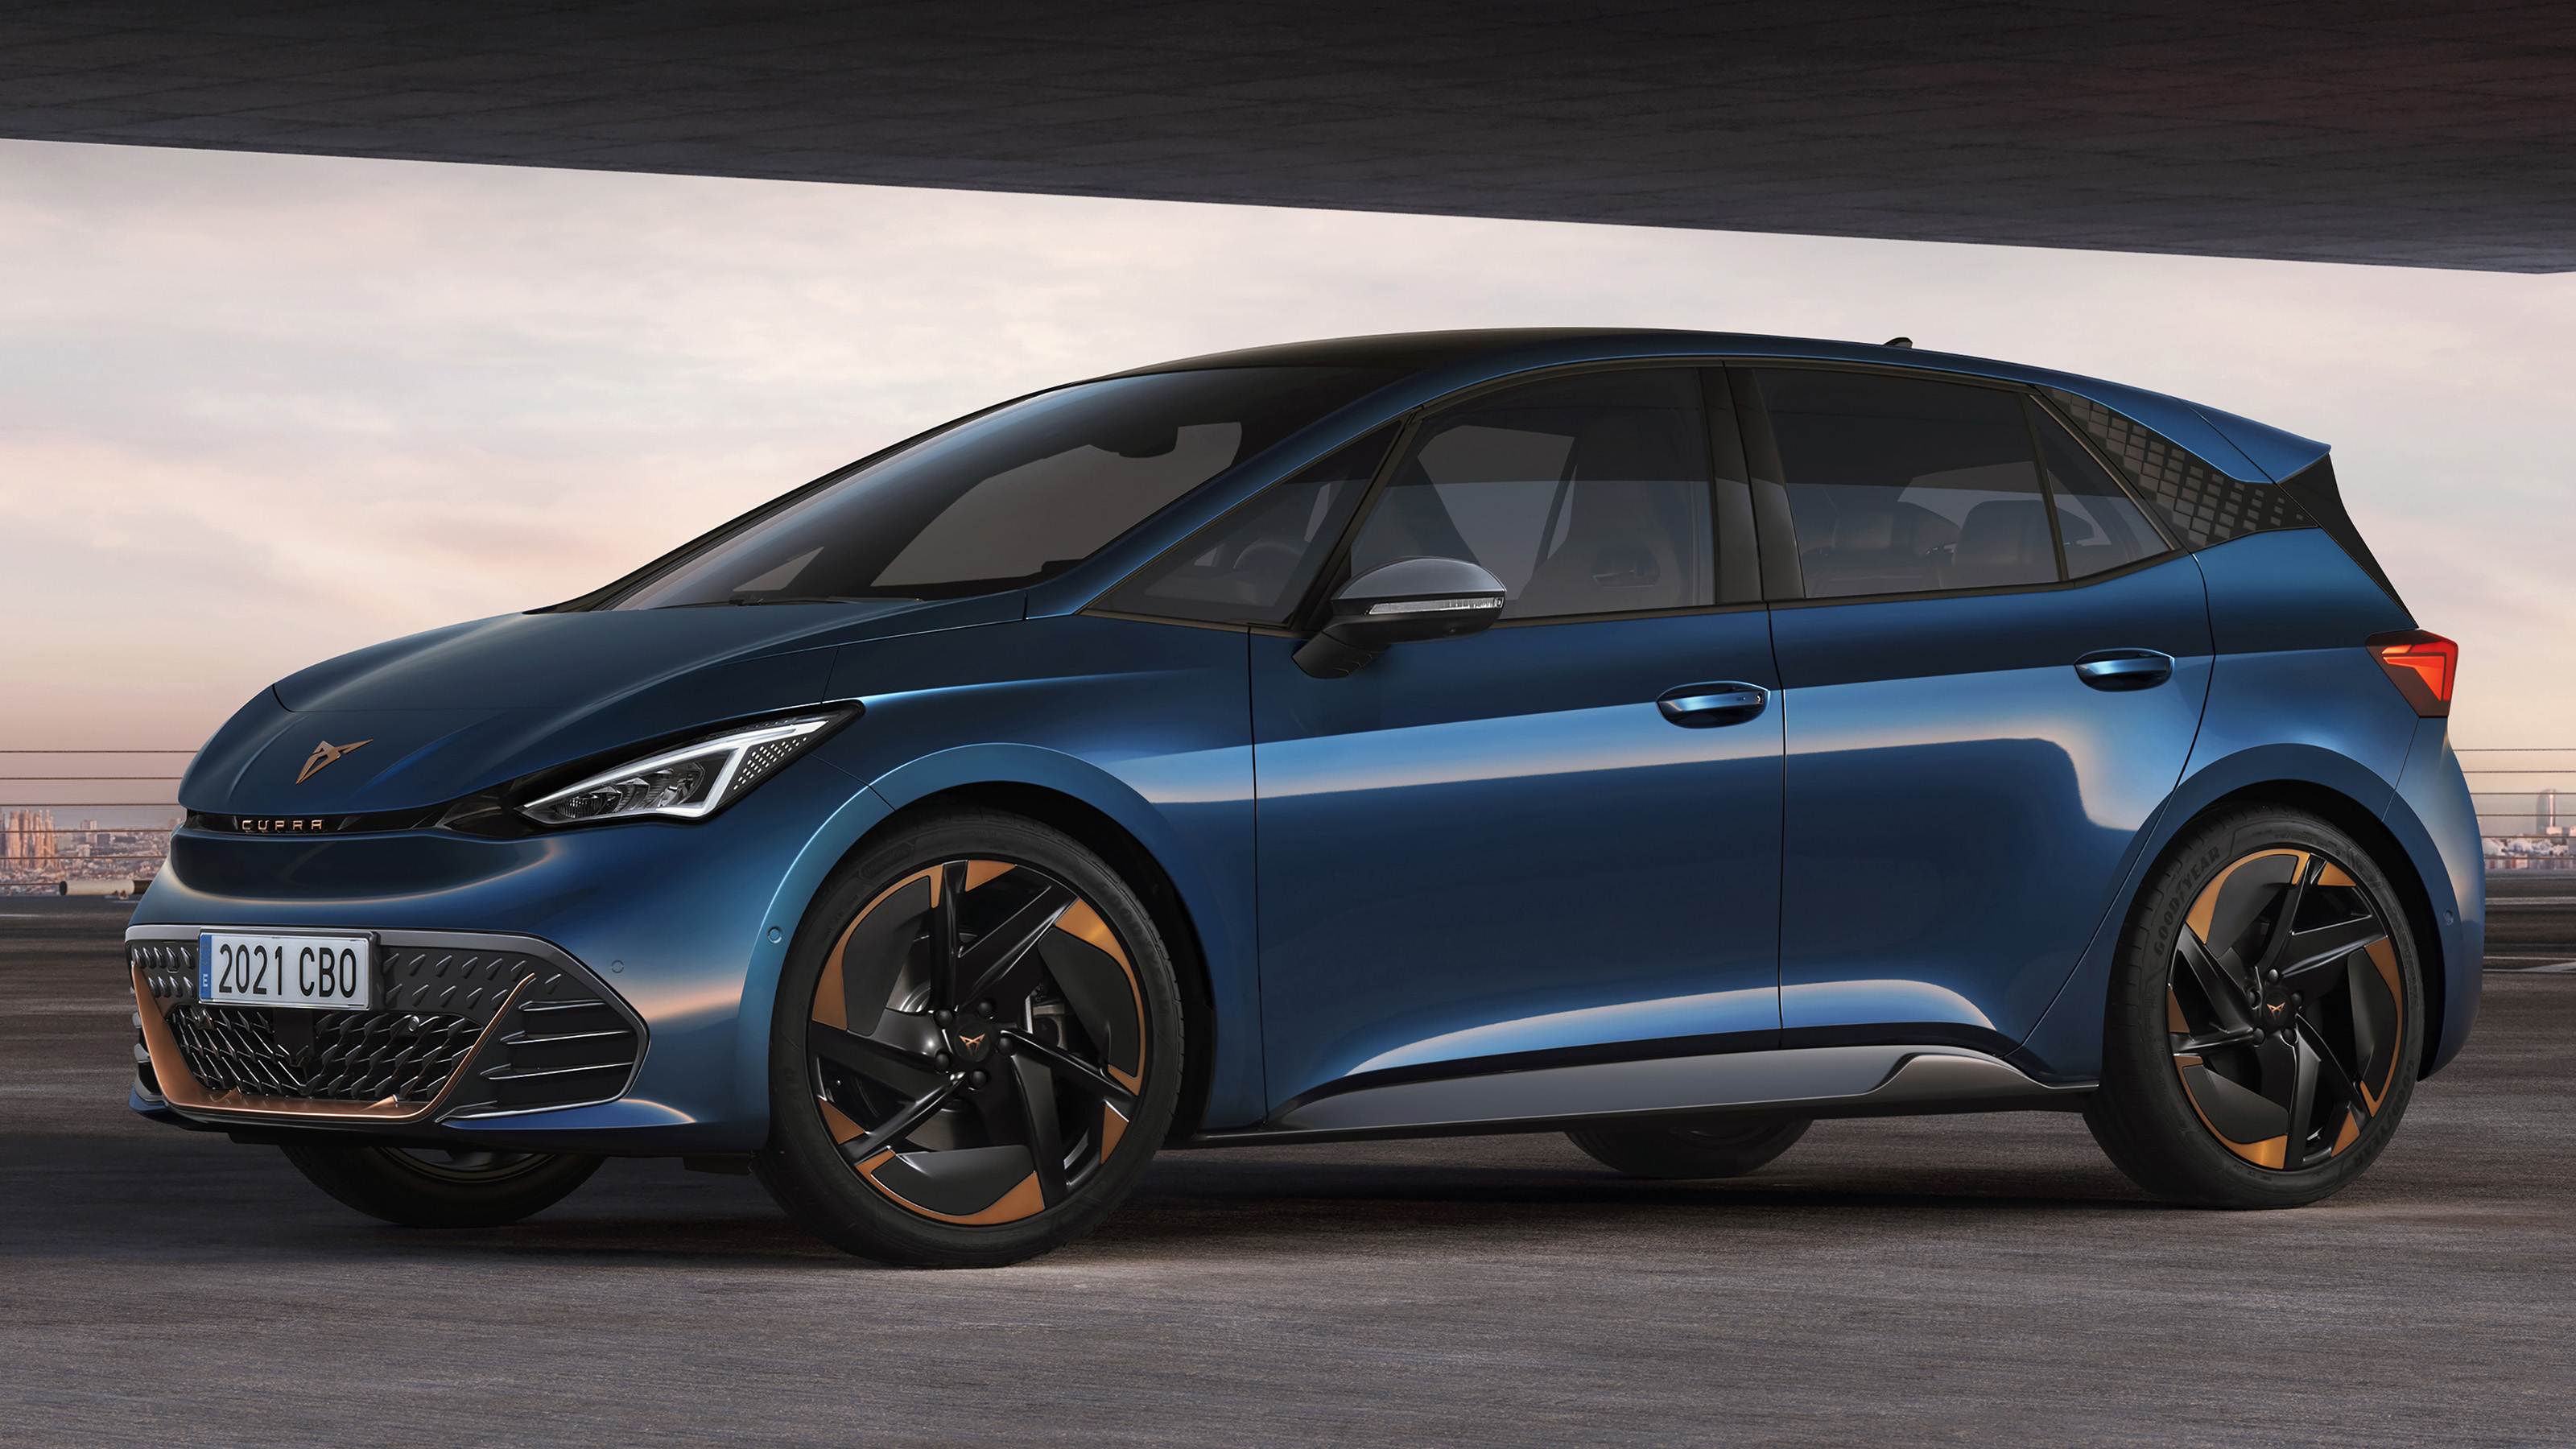 2022 Cupra Born electric car pictures, specs, details and release date